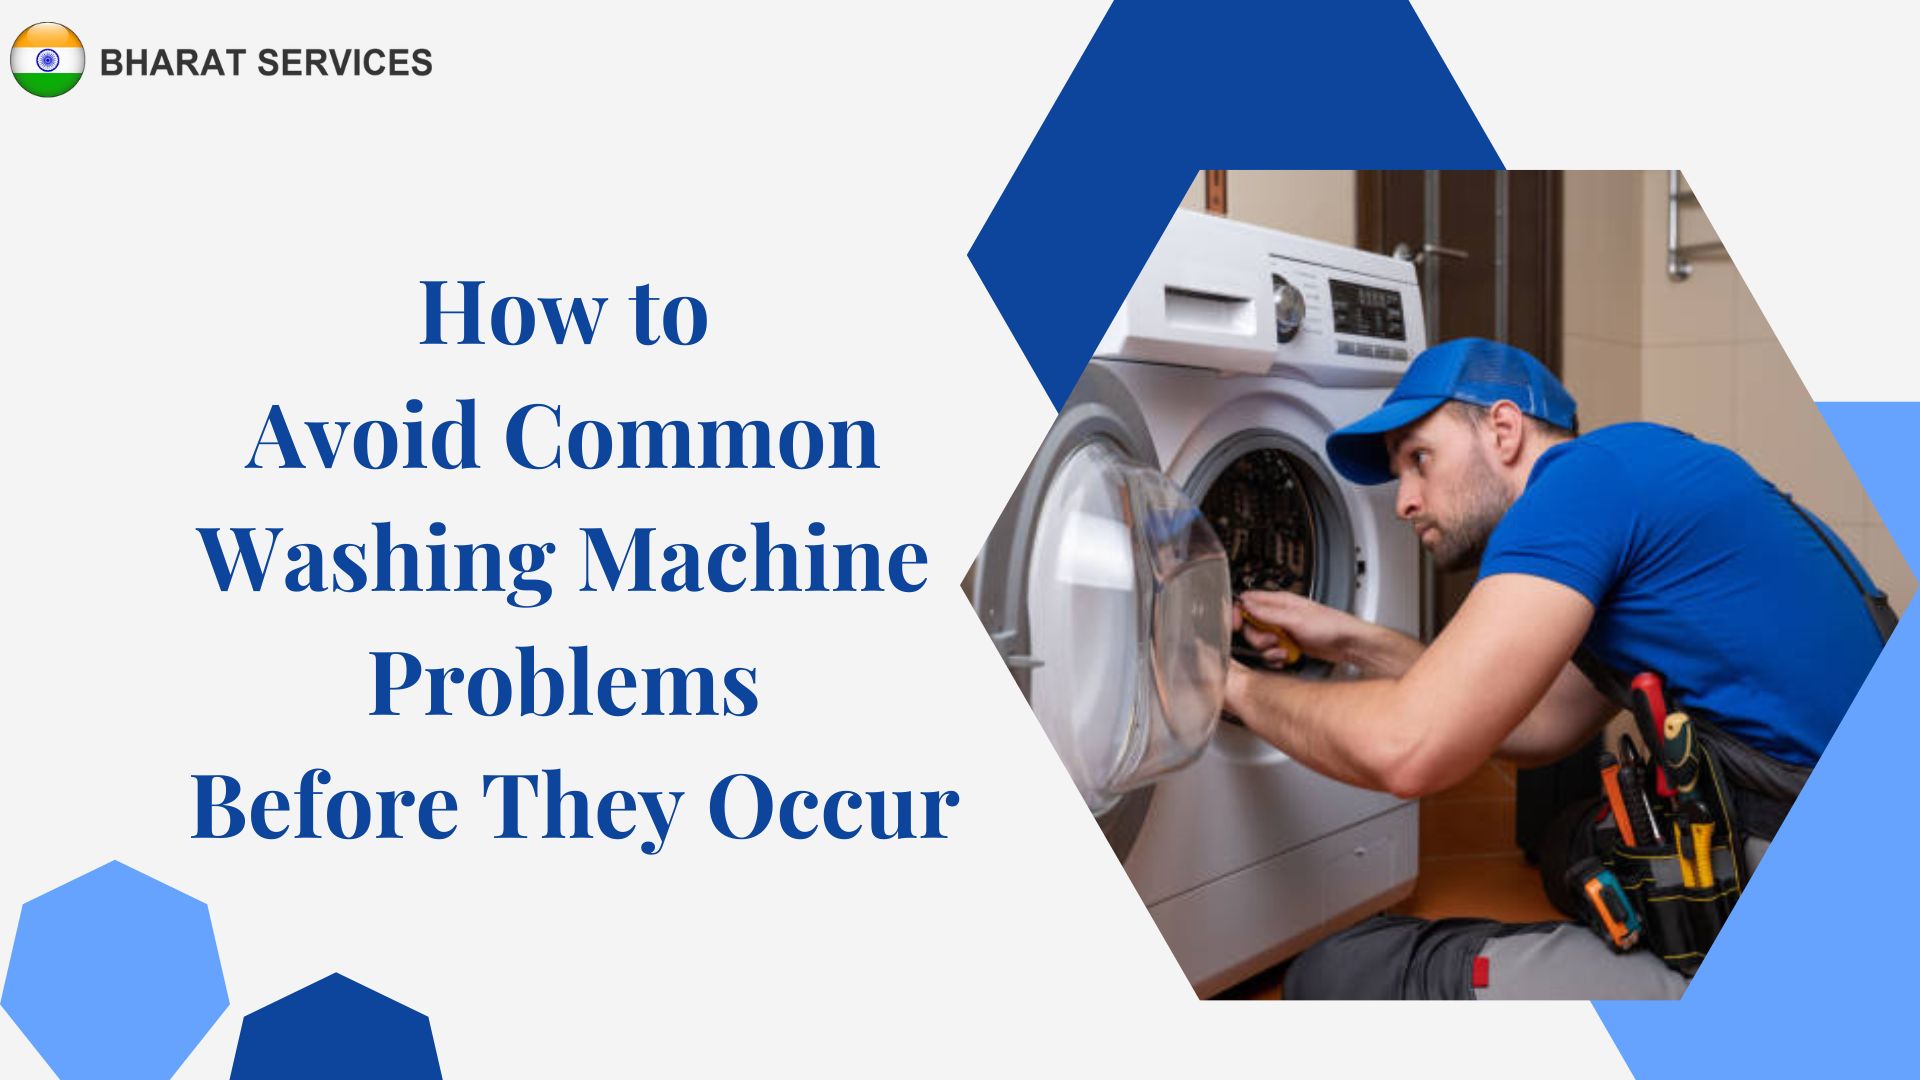 How to Avoid Common Washing Machine Problems Before They Occur